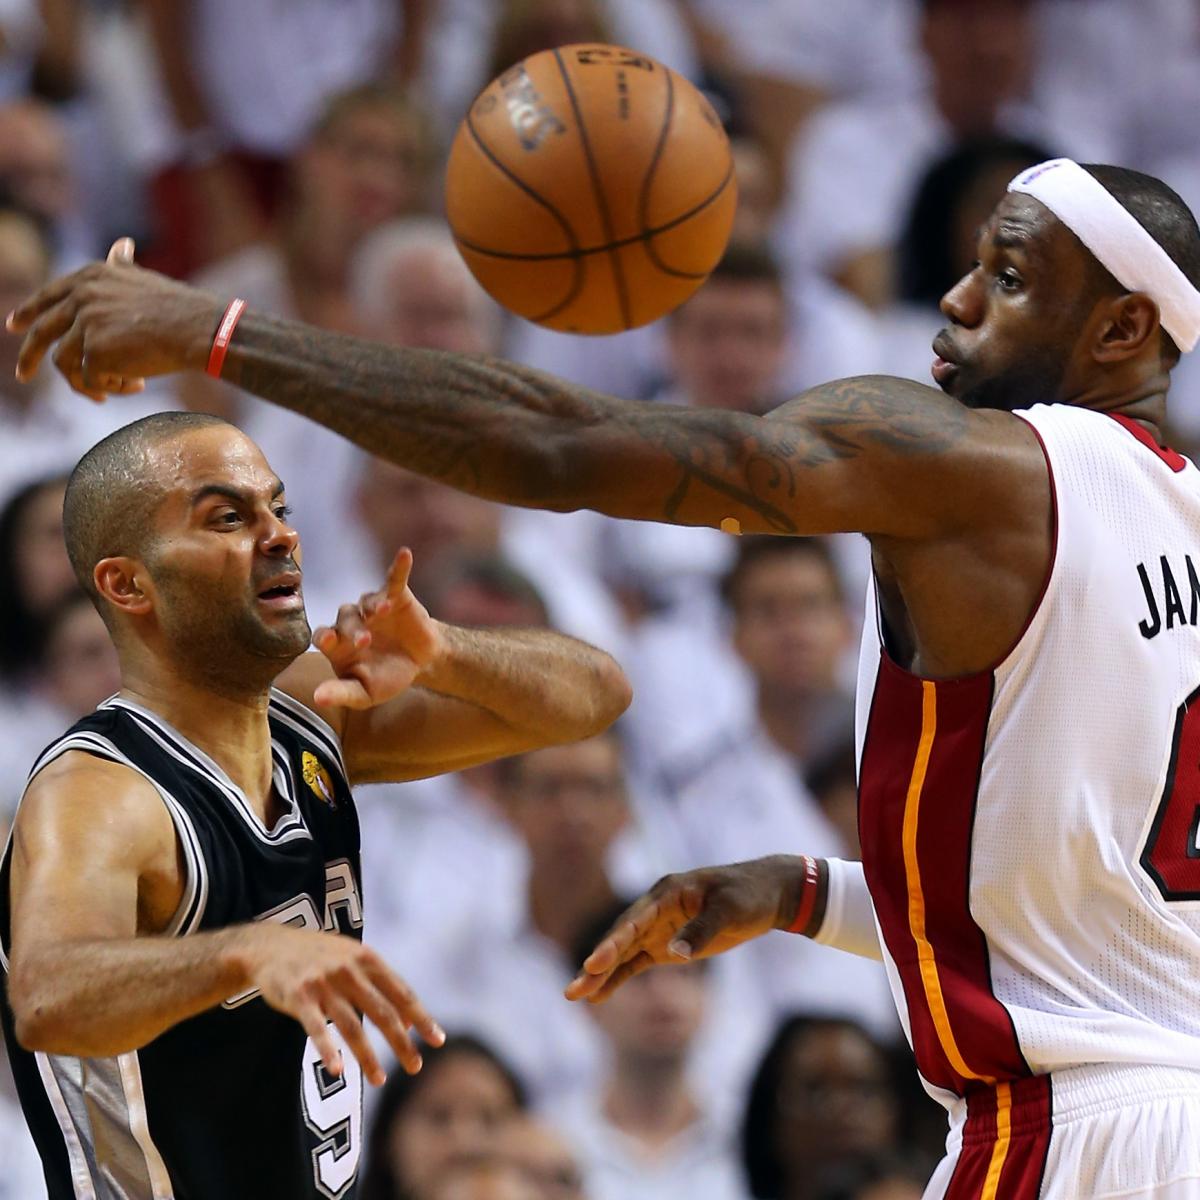 Spurs vs. Heat Game 7: Complete Viewing Guide for Epic 2013 NBA Finals Matchup ...1200 x 1200